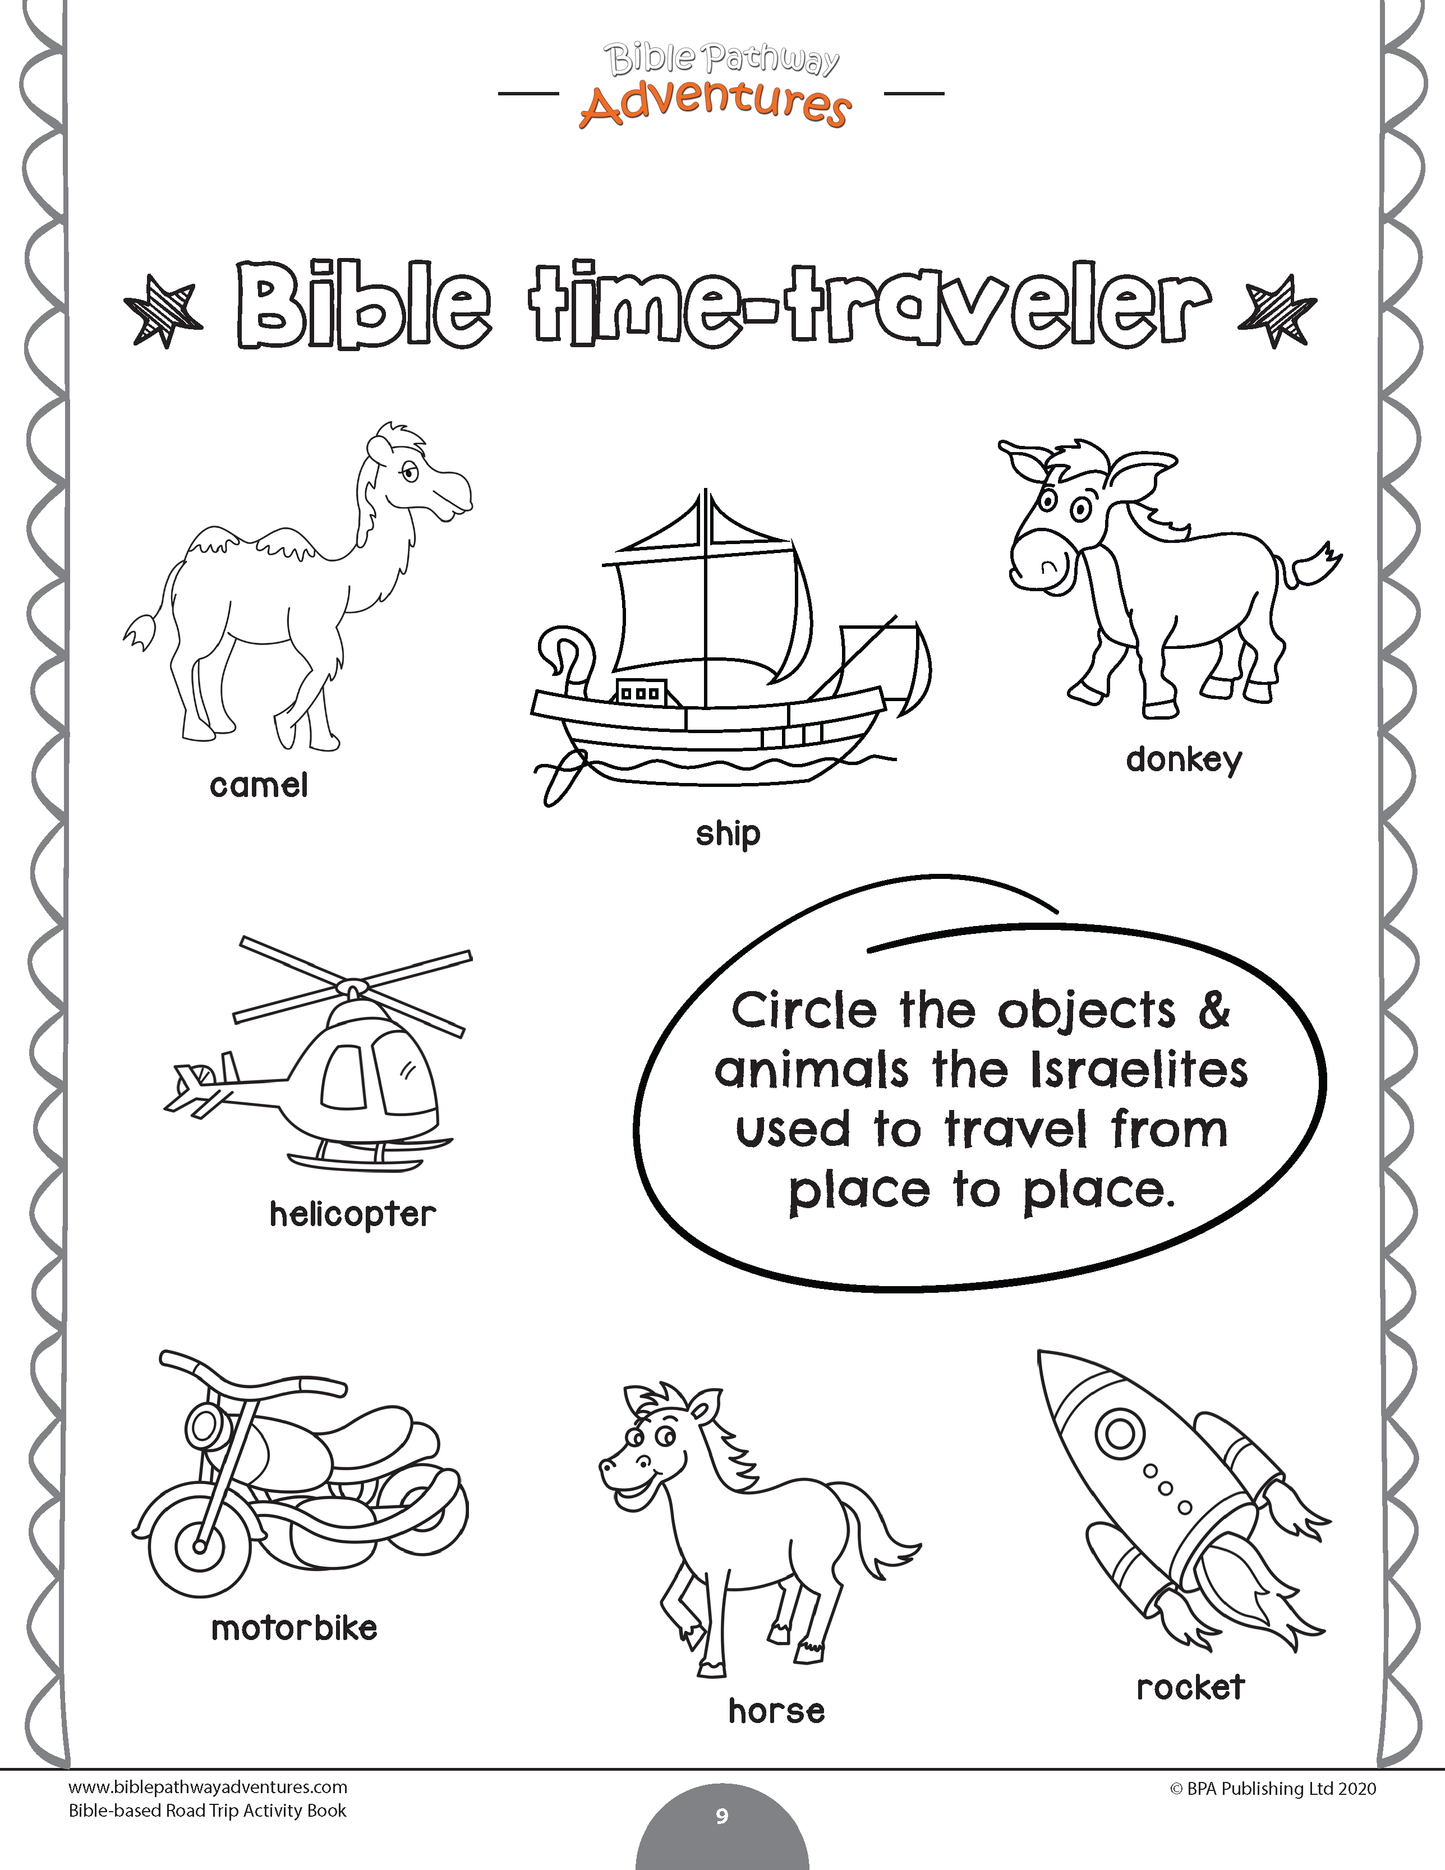 Bible-based Road Trip Activity Book for Beginners